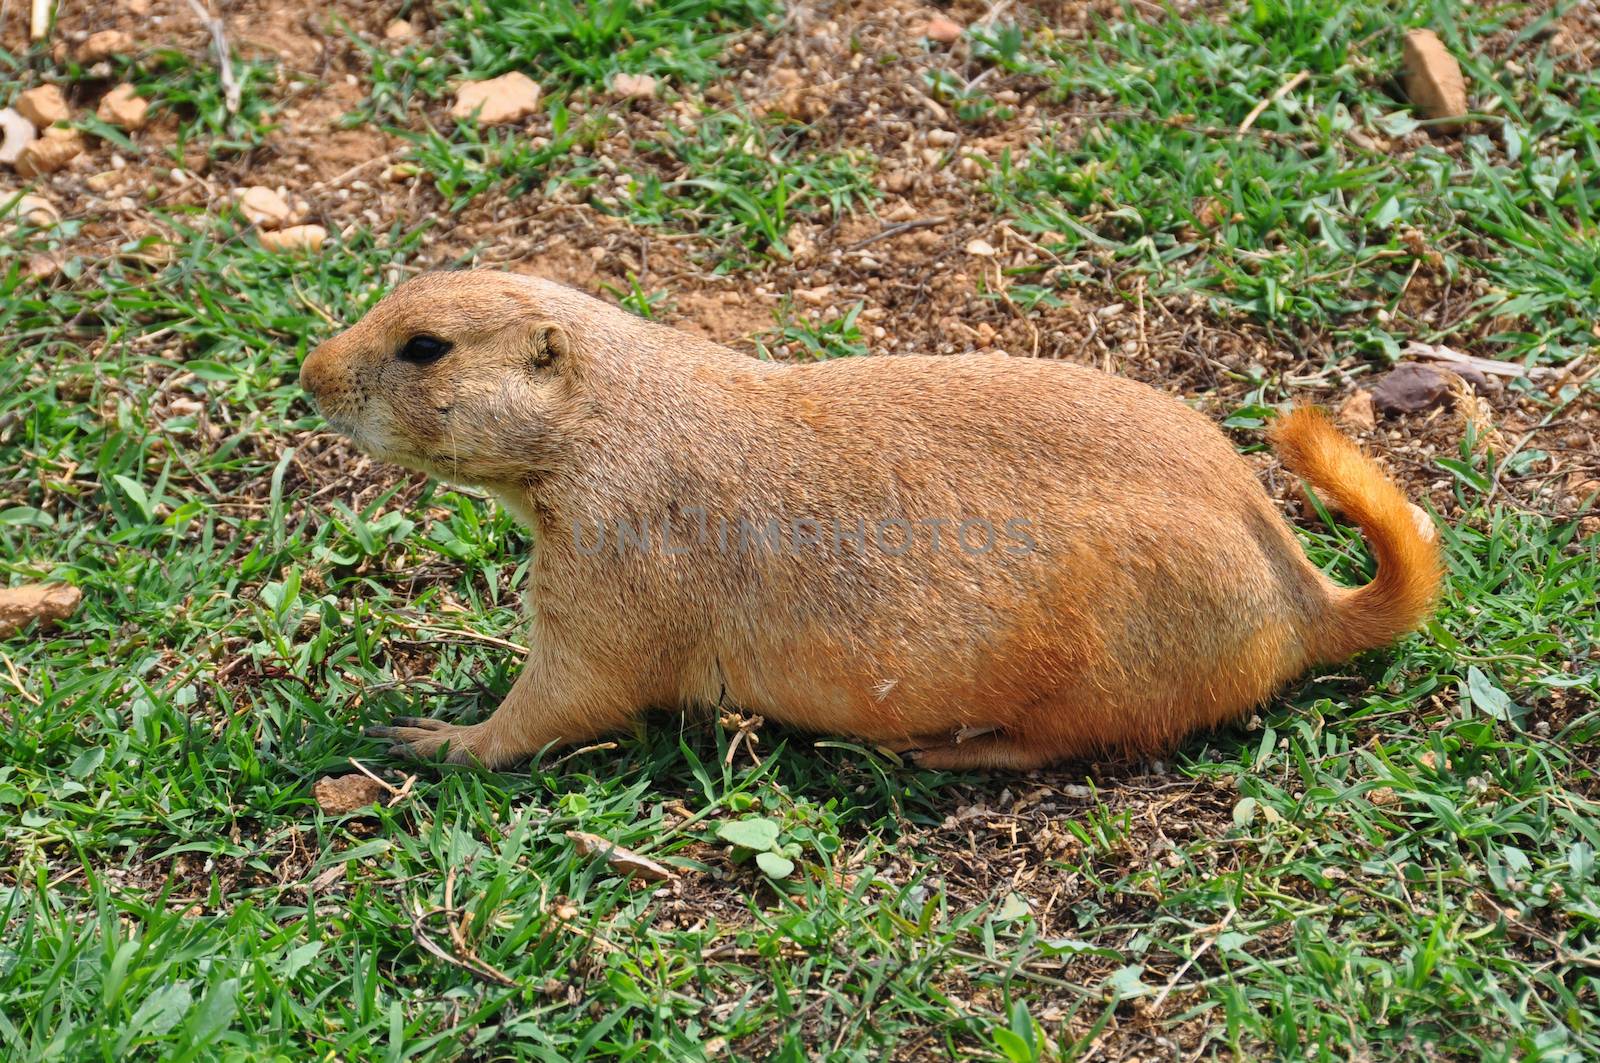 Prairie dog rodent on grass. Animal in natural environment.